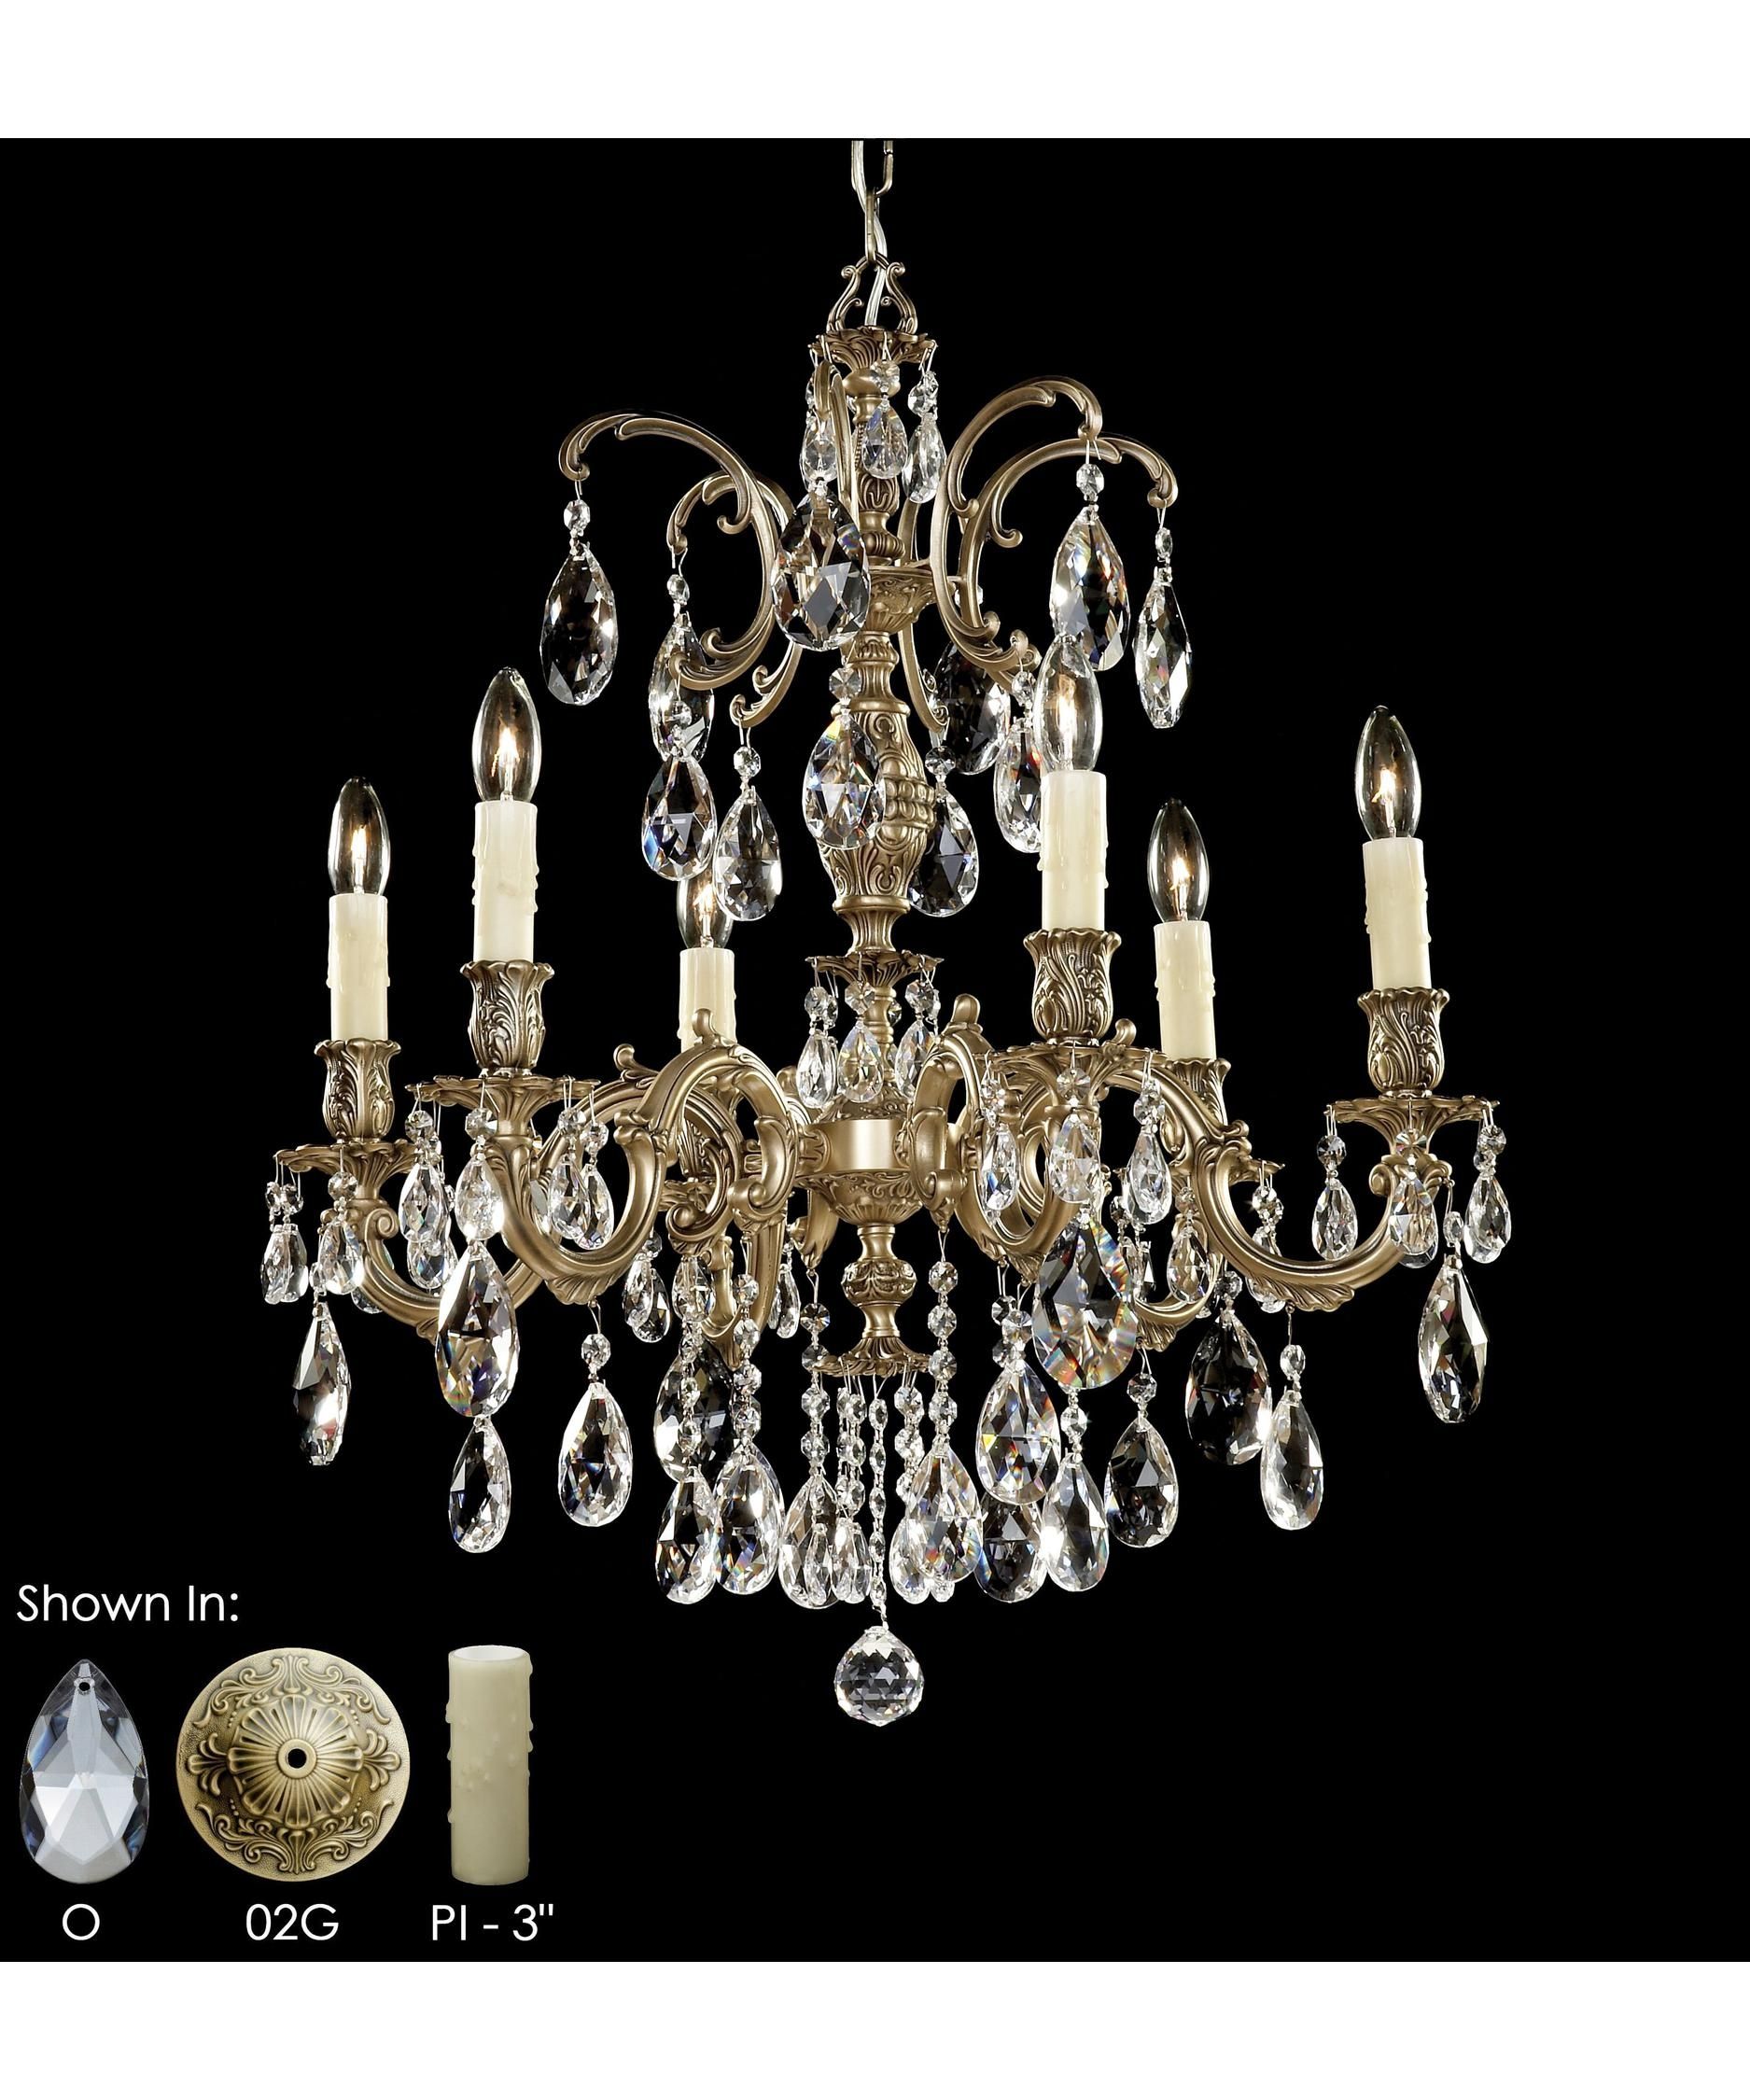 American Brass And Crystal Ch9713 Marlena 23 Inch Wide 6 Light Intended For Antique Black Chandelier (View 12 of 15)